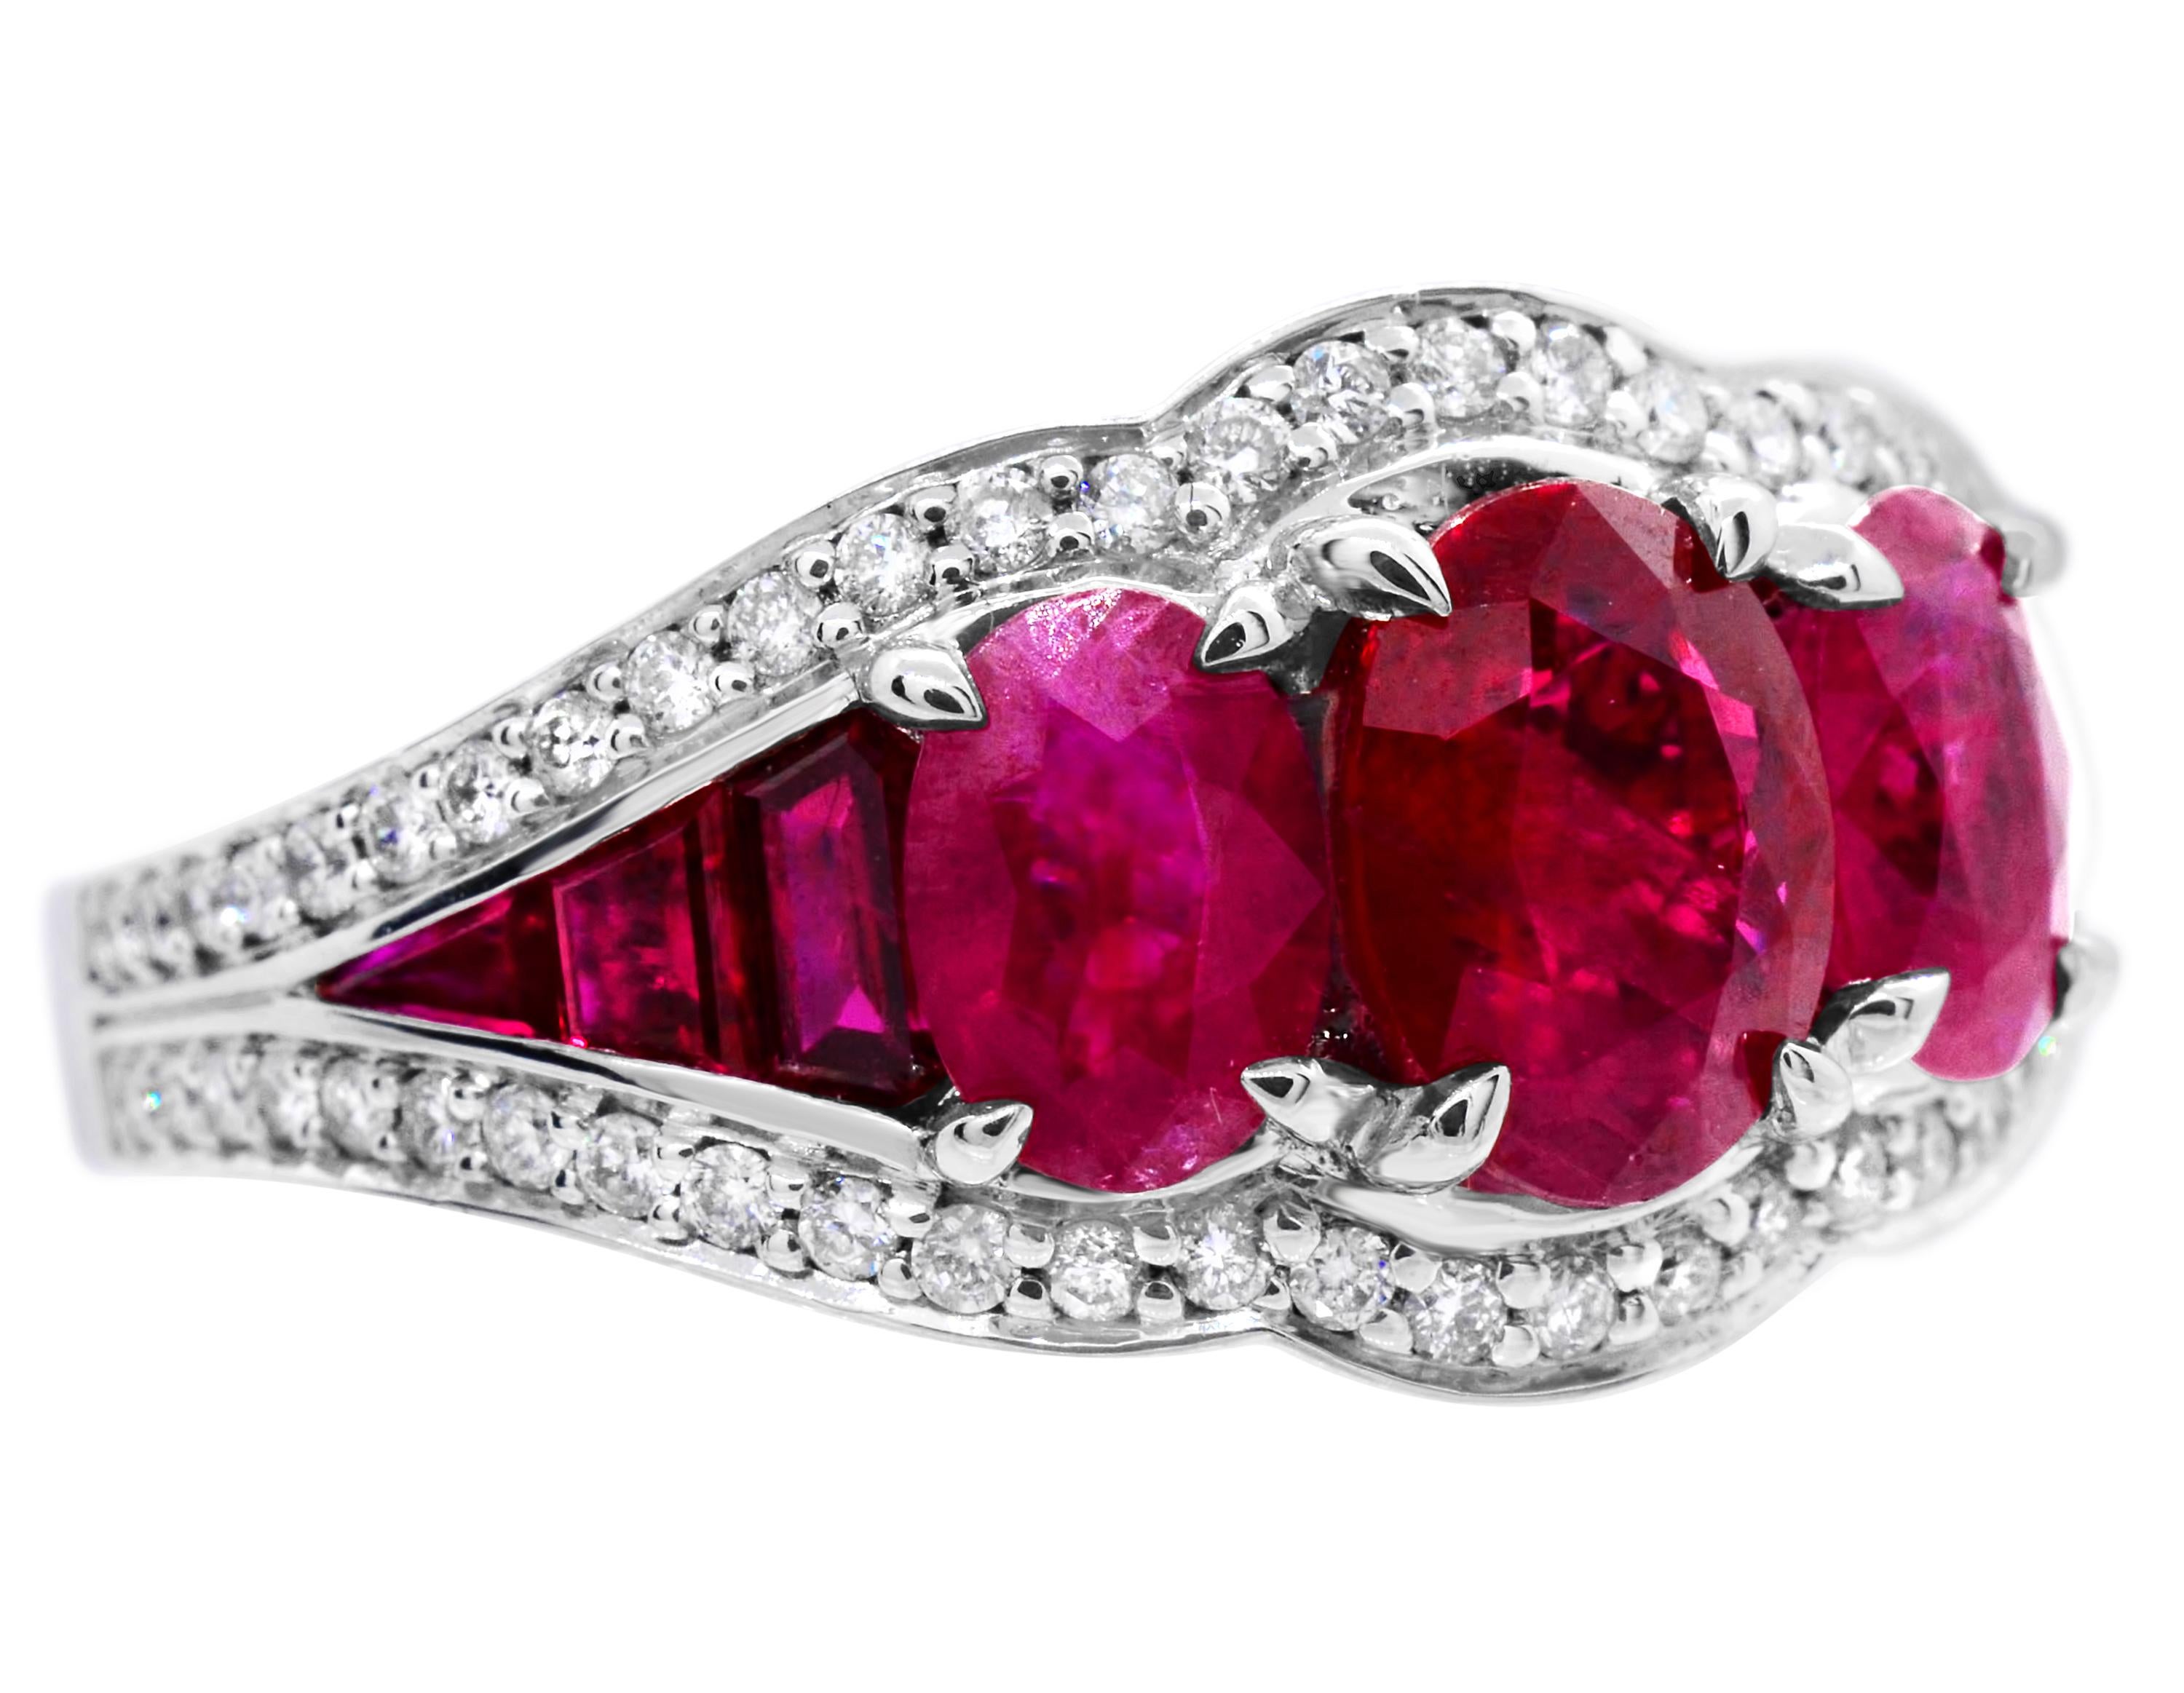 Three-stone 14Karat white gold ruby ring.  This three-stone cocktail ring has a 7 x 5 oval ruby at the center that weighs 1.10 carat.  At each side, there is a 6 x 4 ruby that have a combined total weight of 1.20 carat.  Additionally, on each side